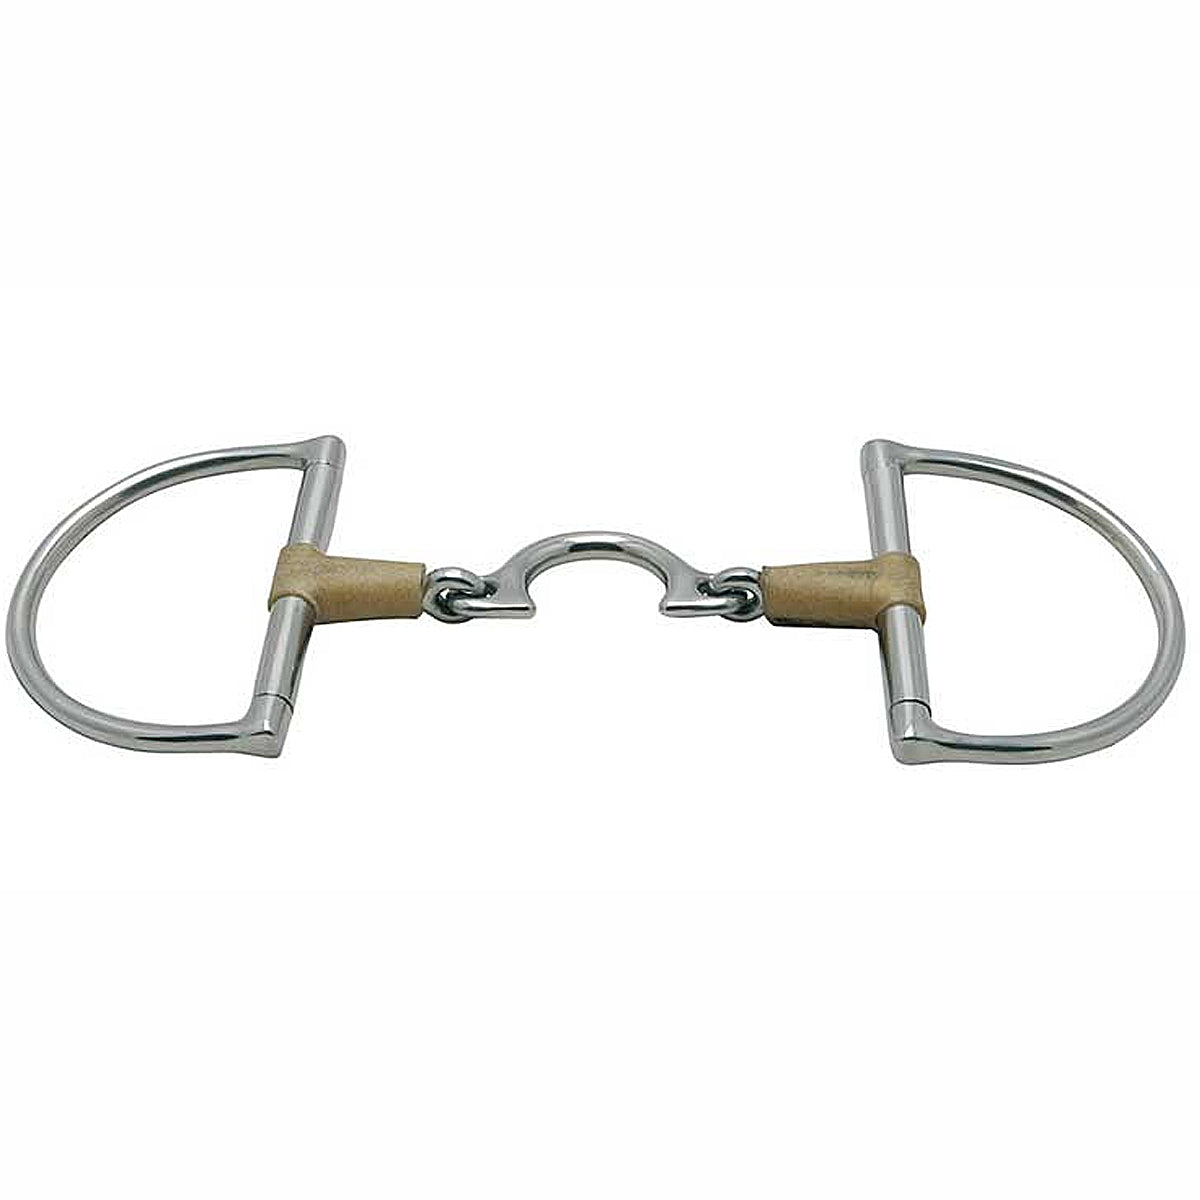 Metalab Jointed Rawhide Leather with Quarter Moon D-ring Snaffle Bit